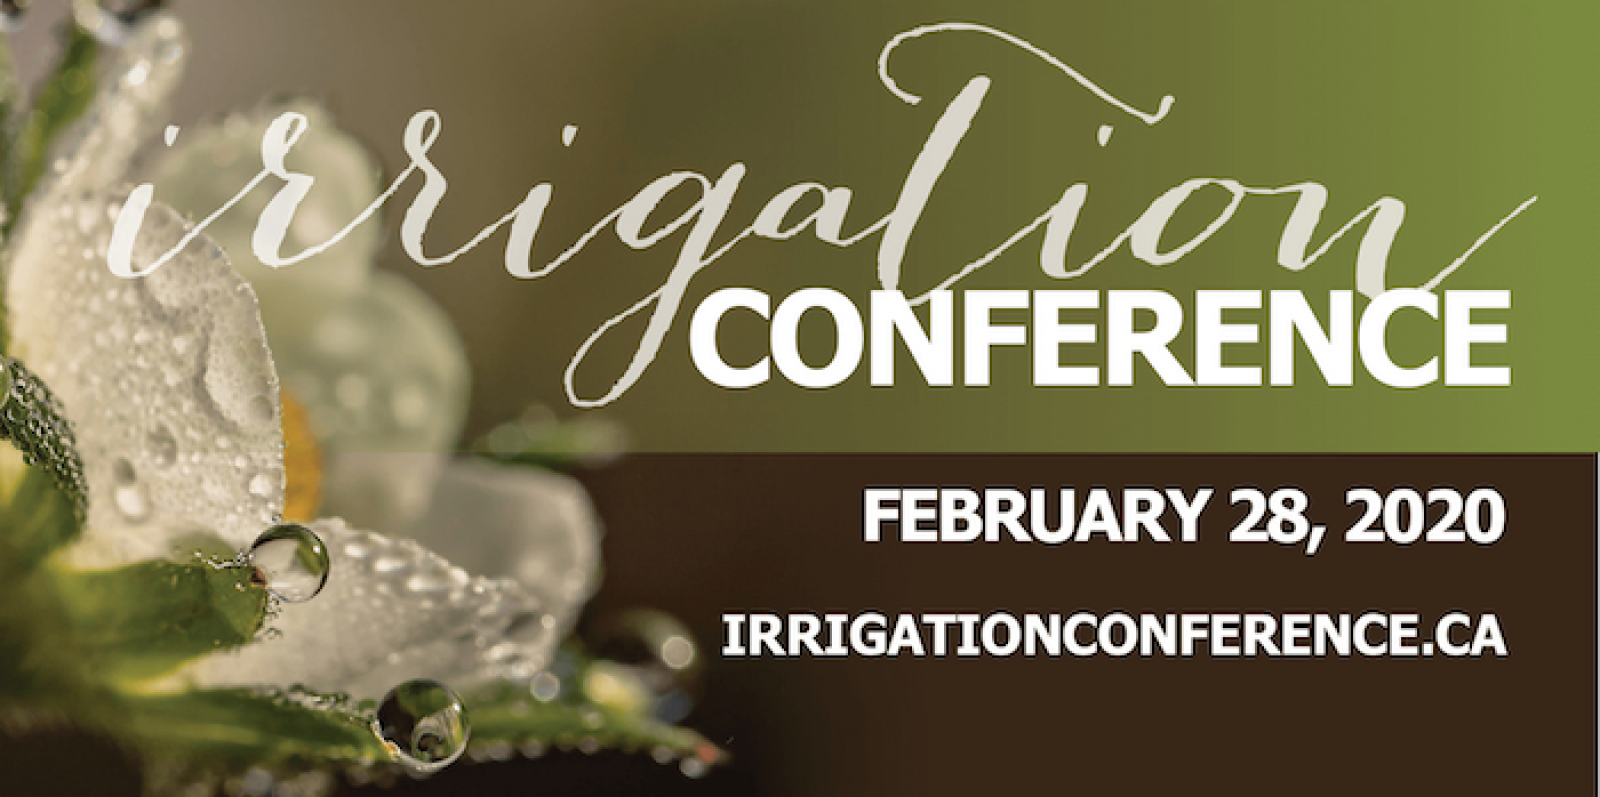 Irrigation Conference 2020